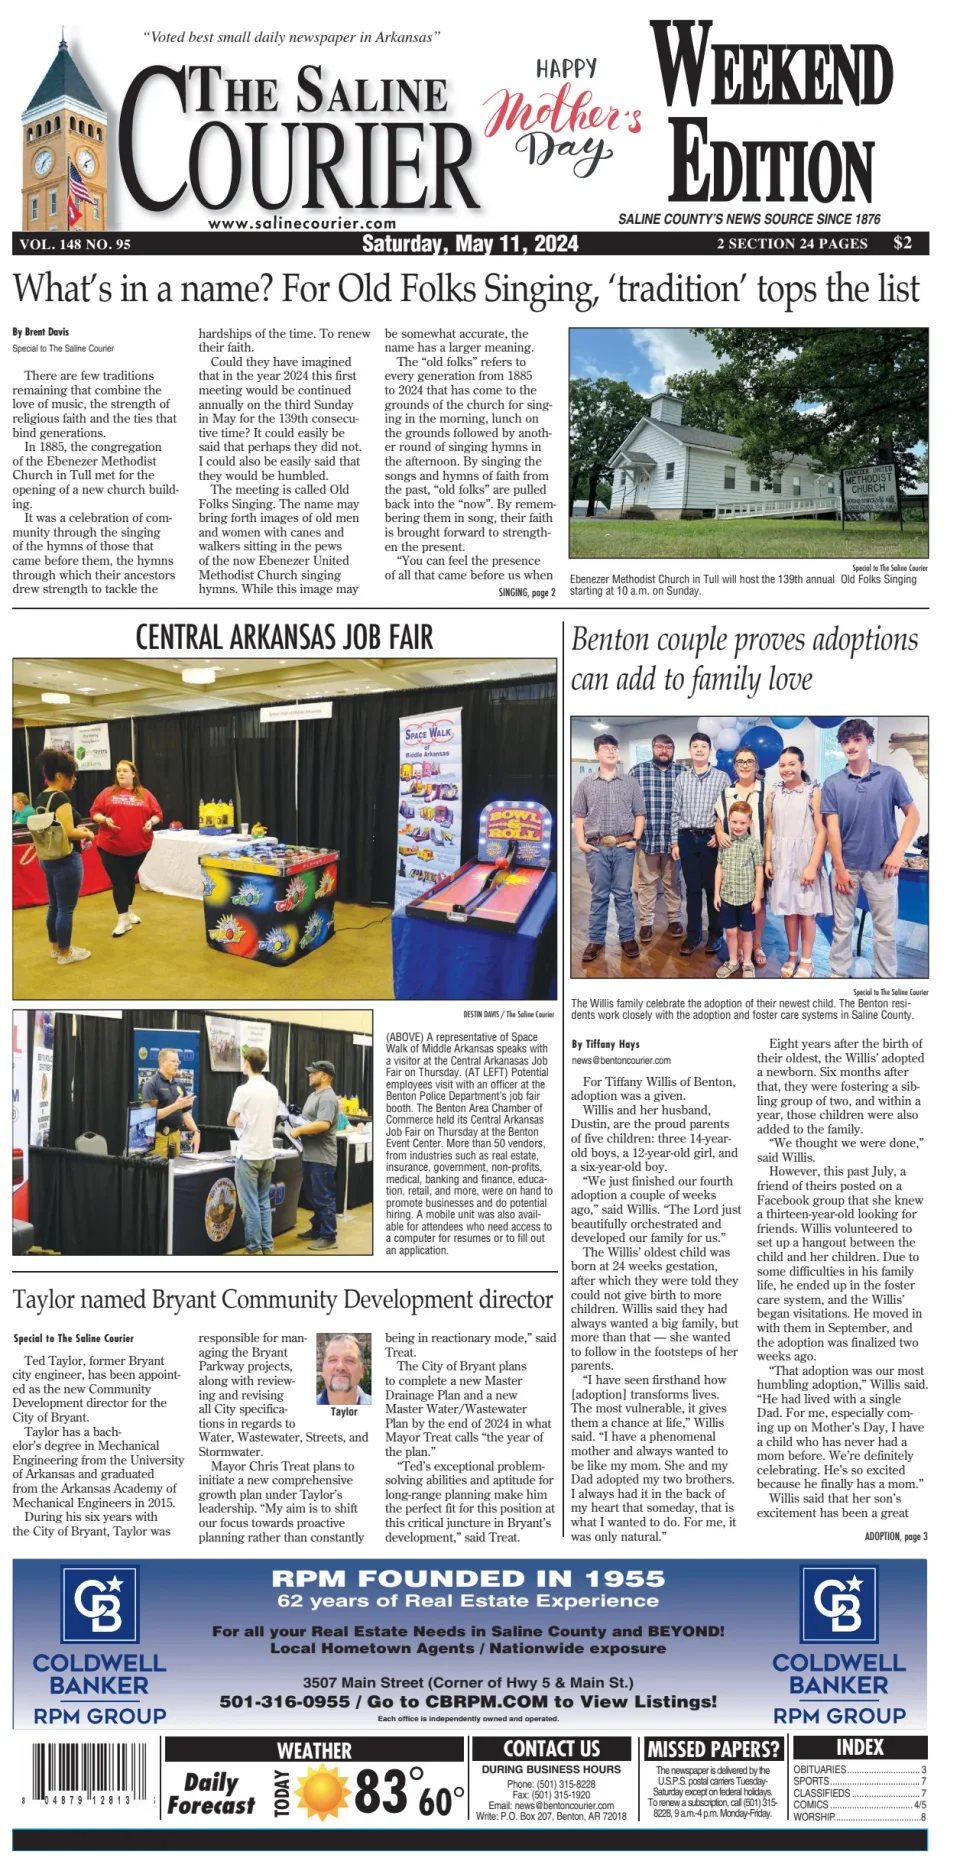 The Saline Courier Weekend